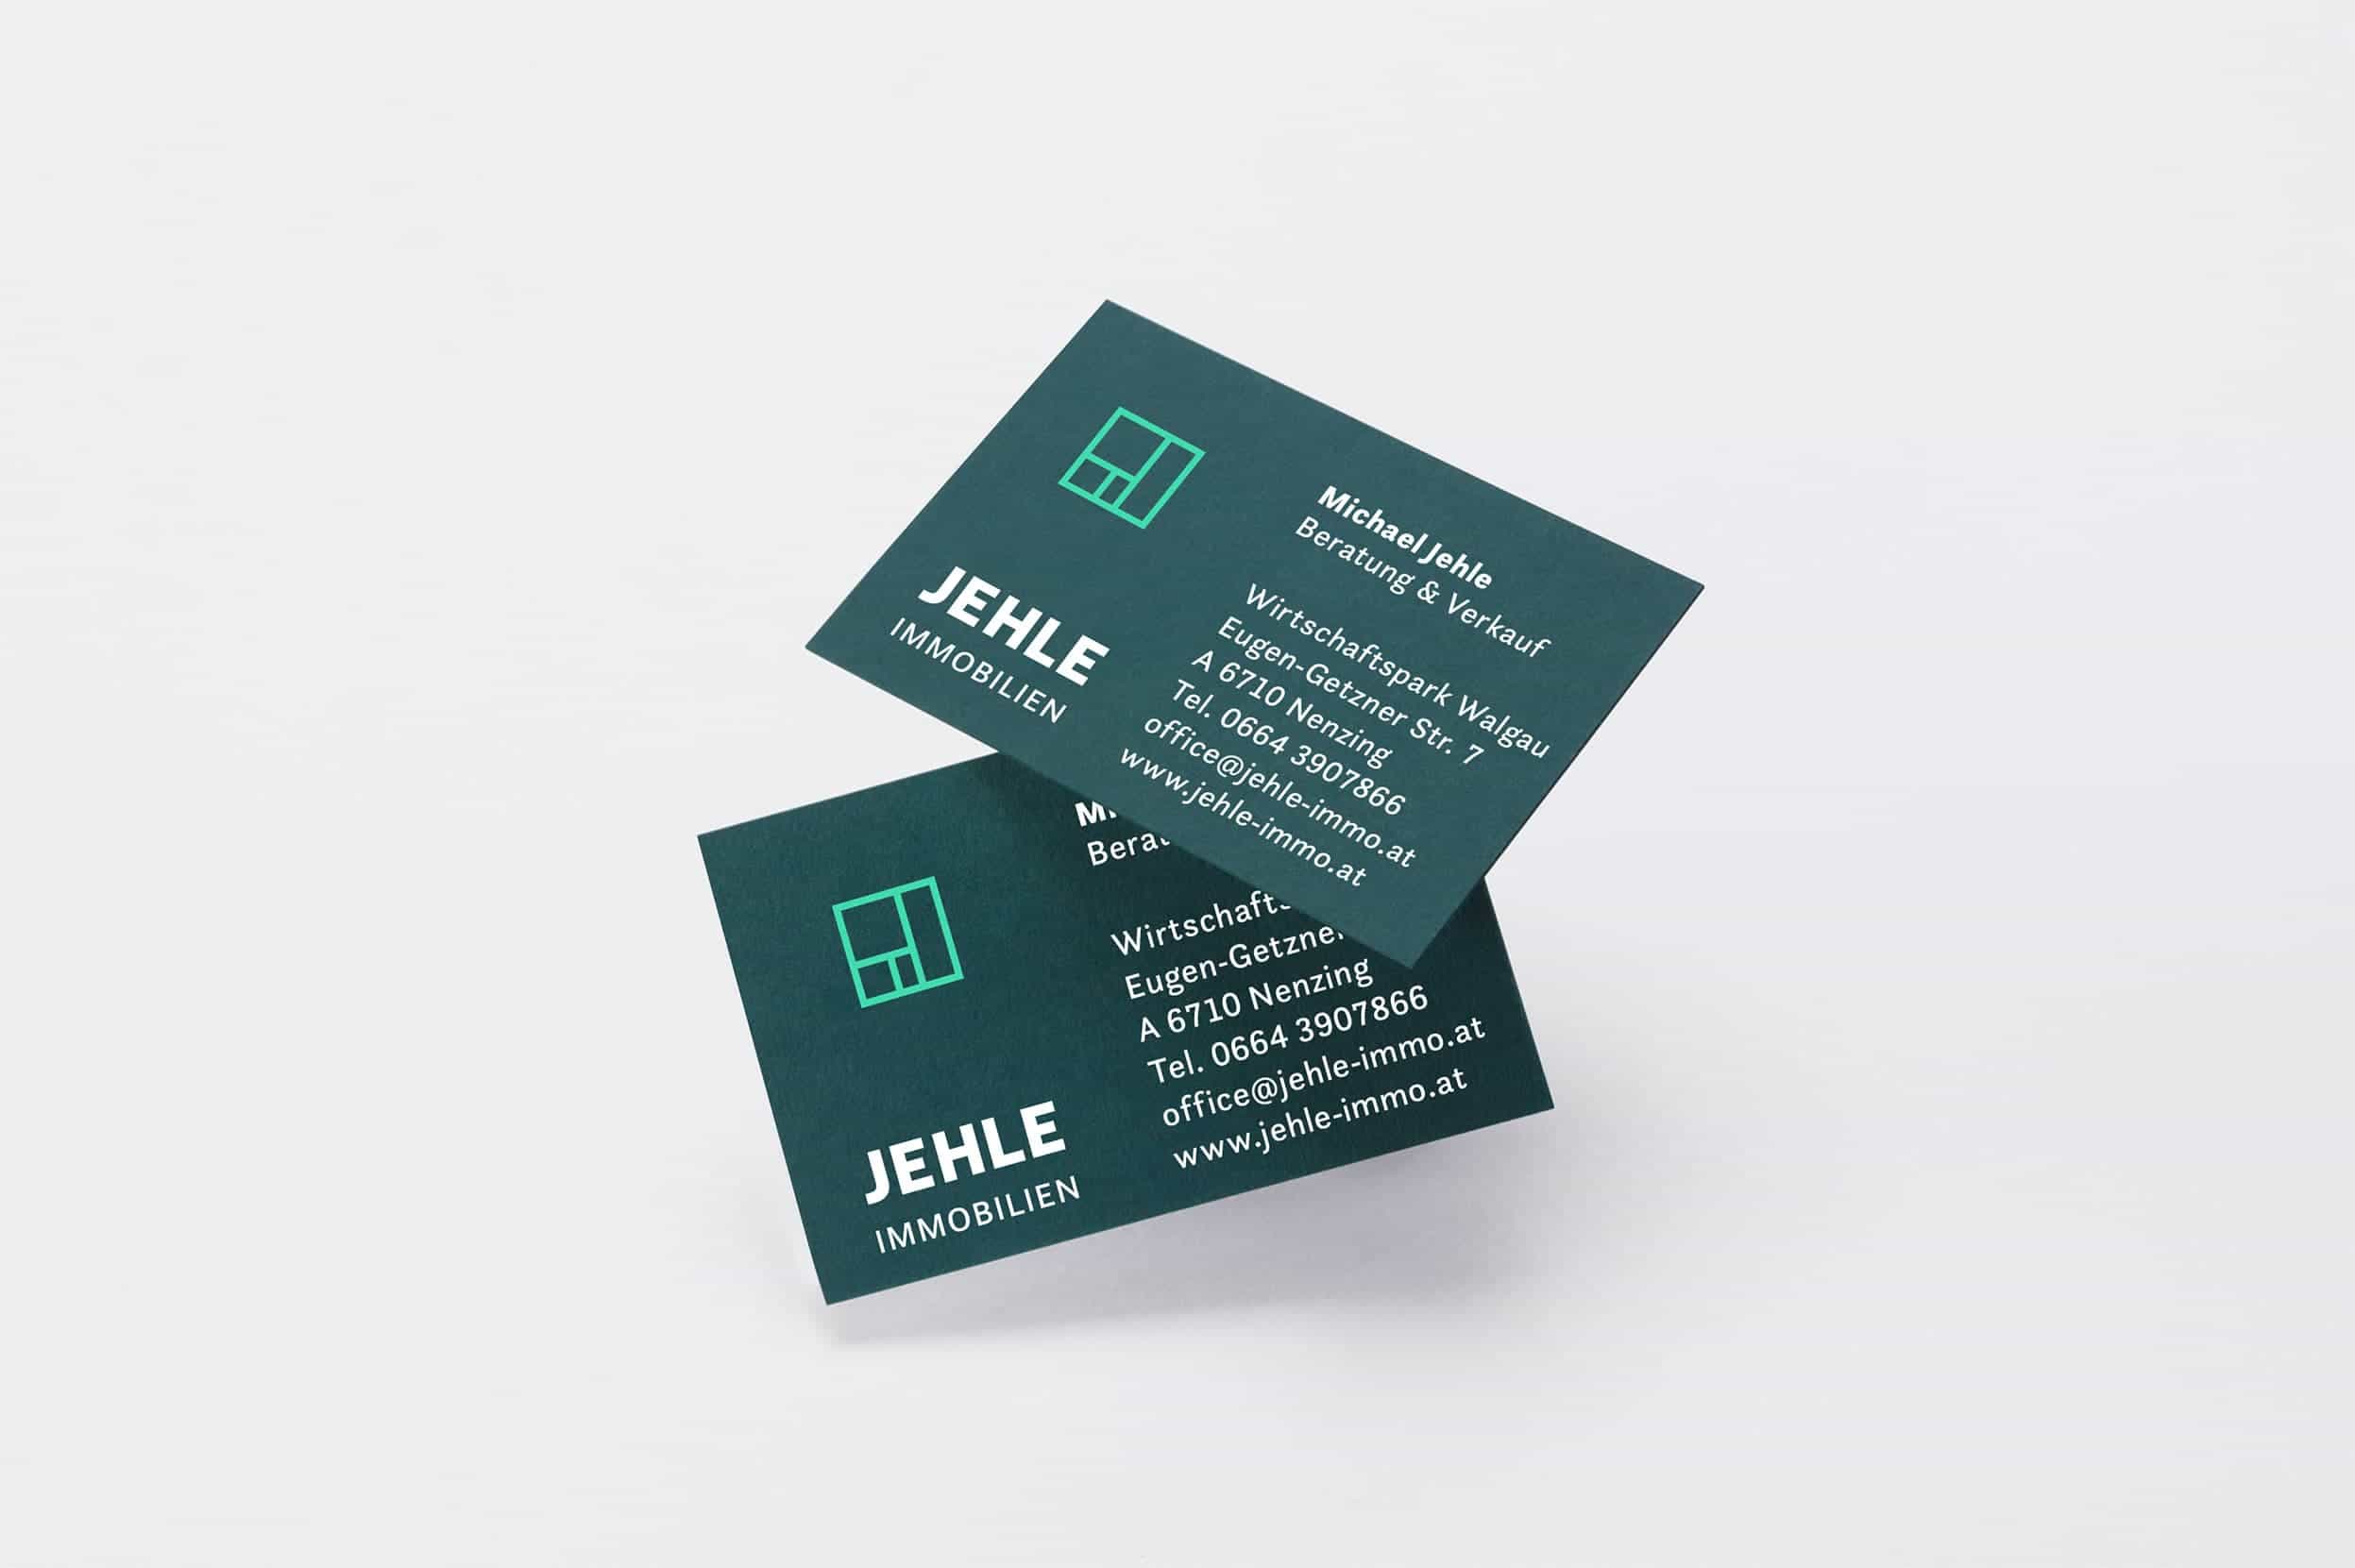 Jehle Immobilien